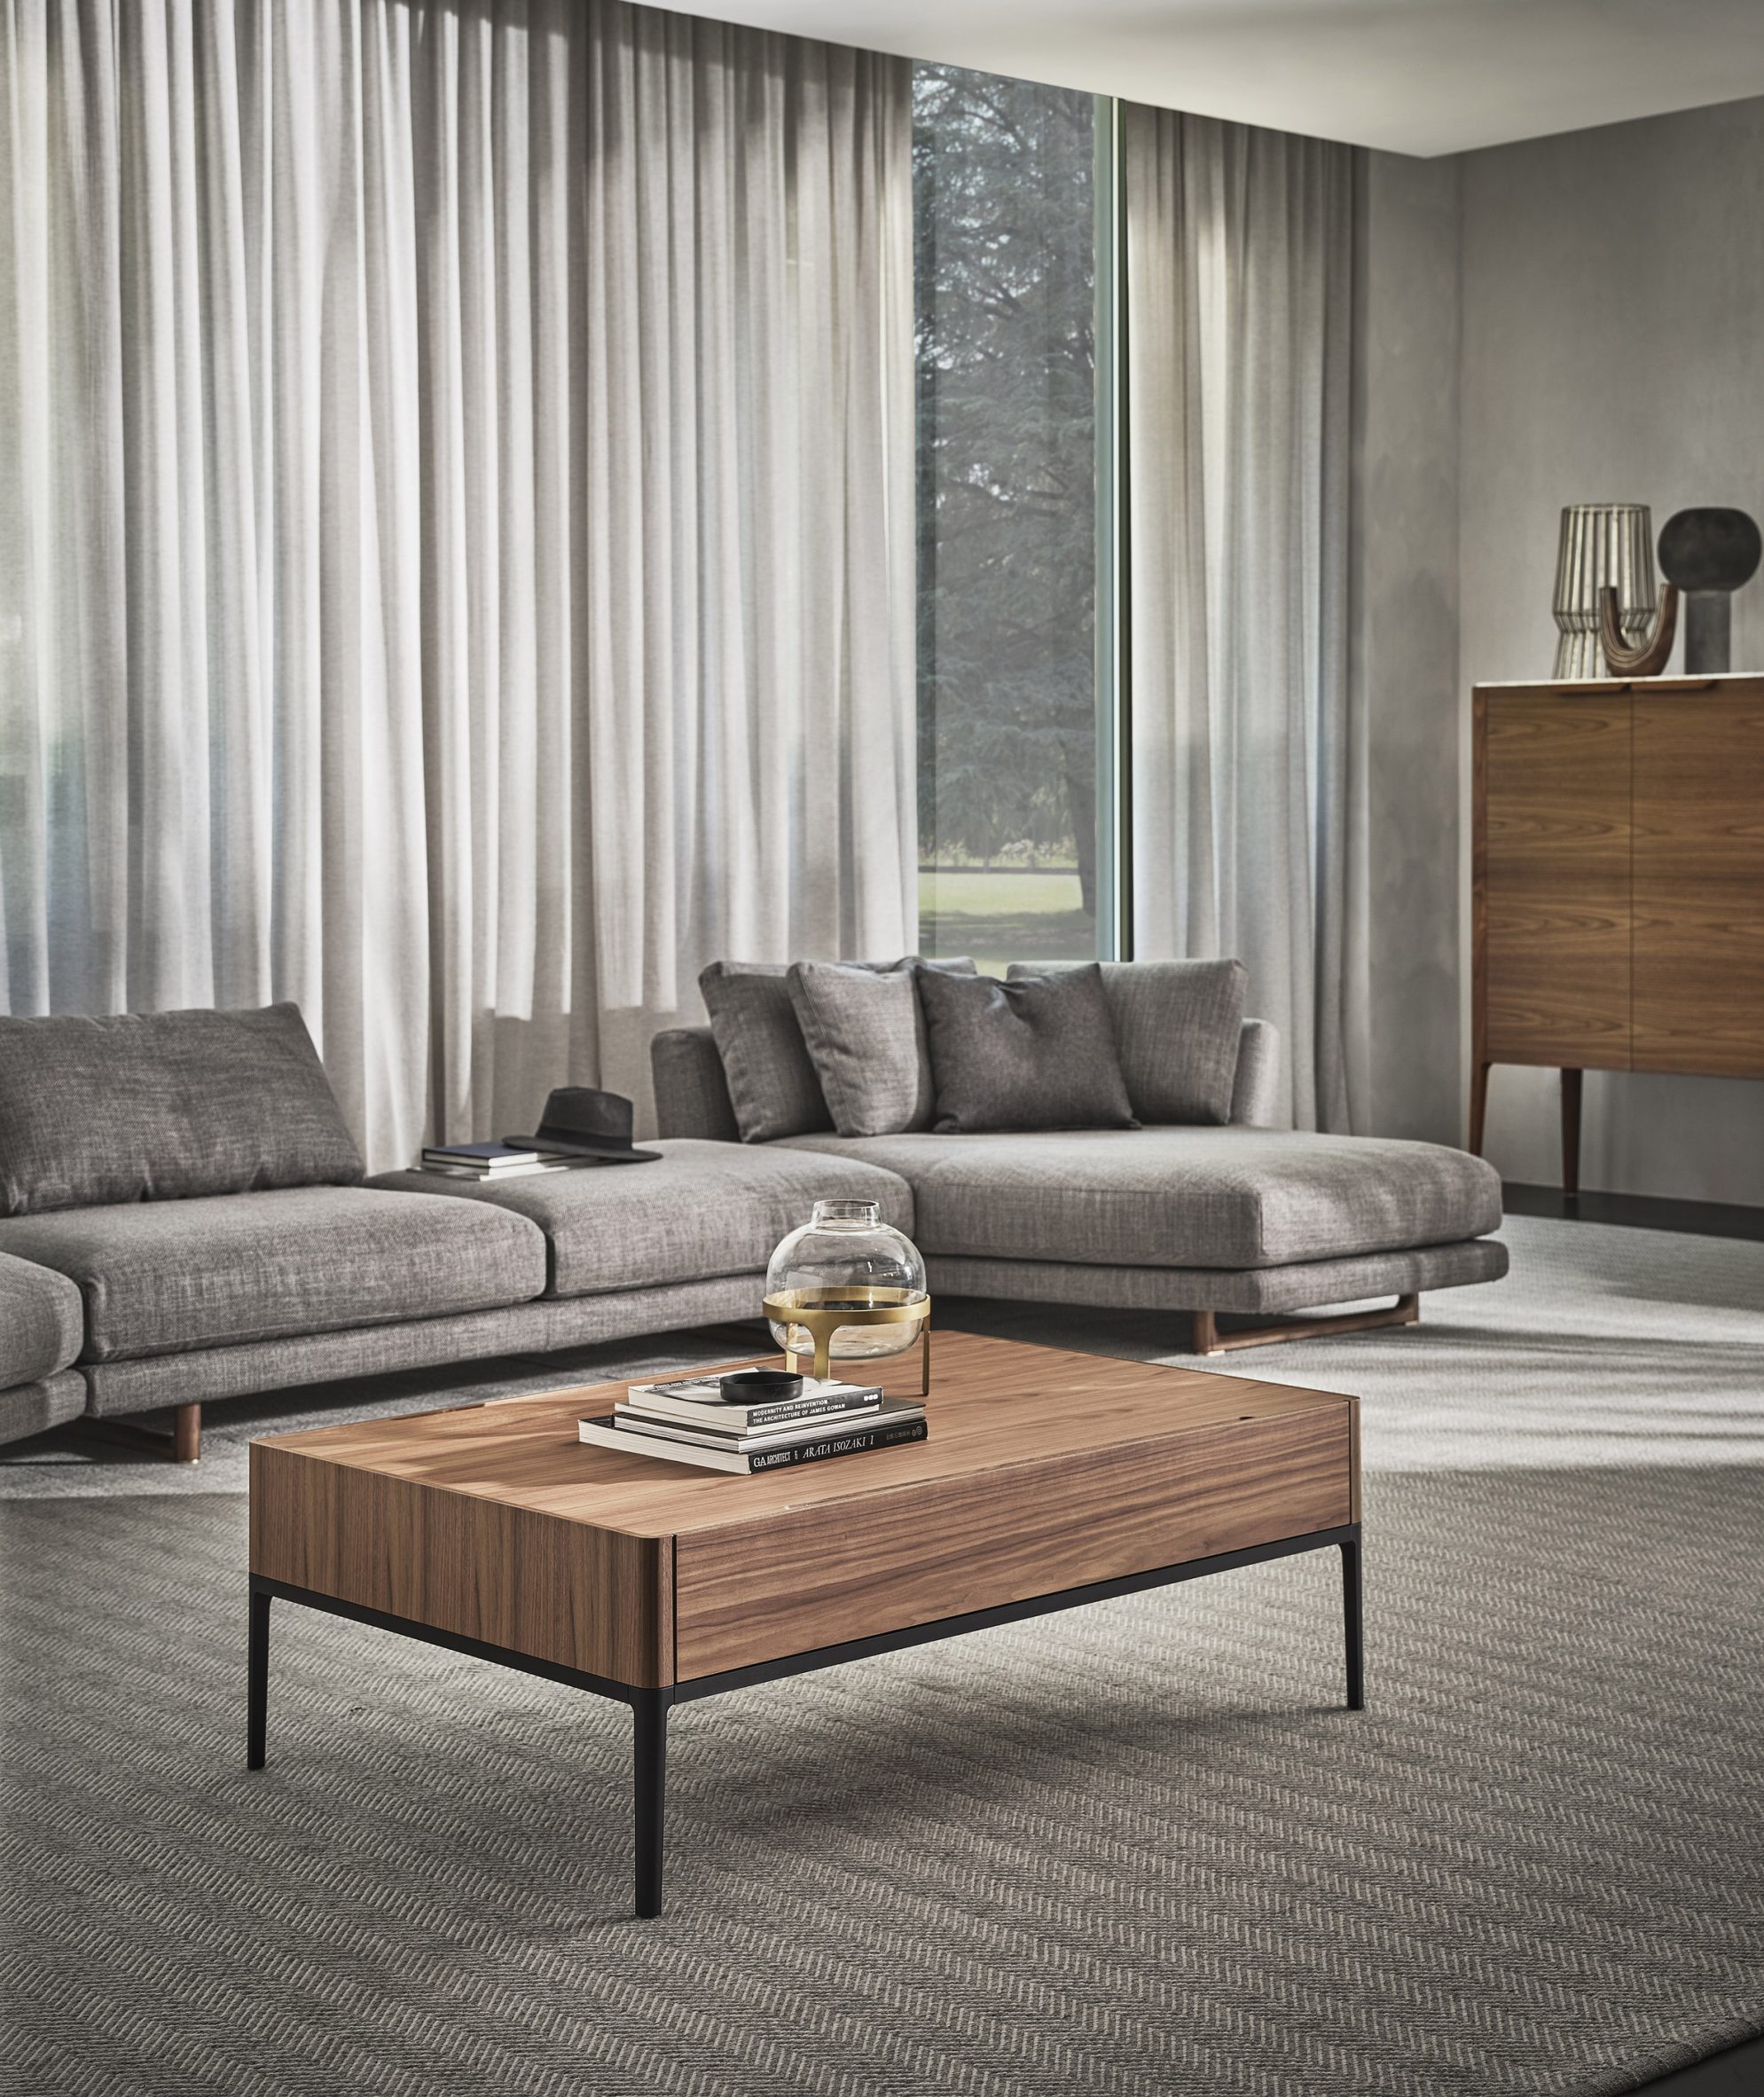 A living room with furniture by Porada